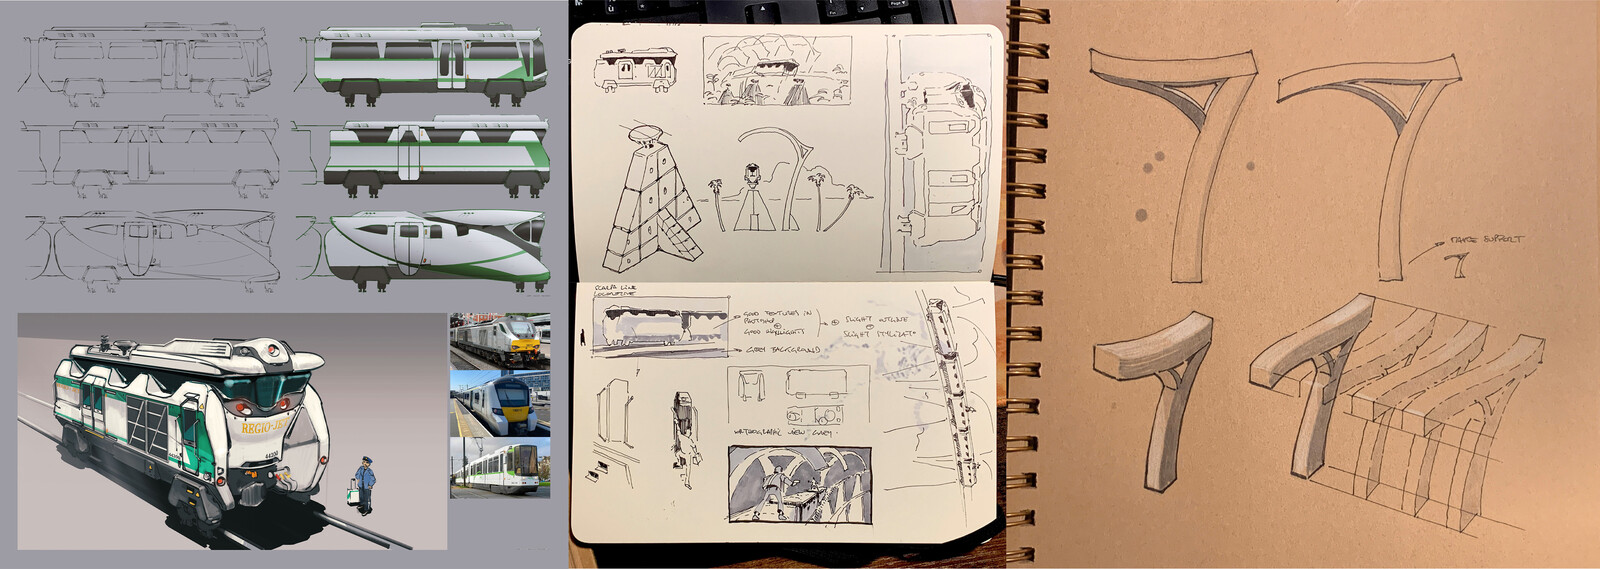 thumbnails and preparatory sketches